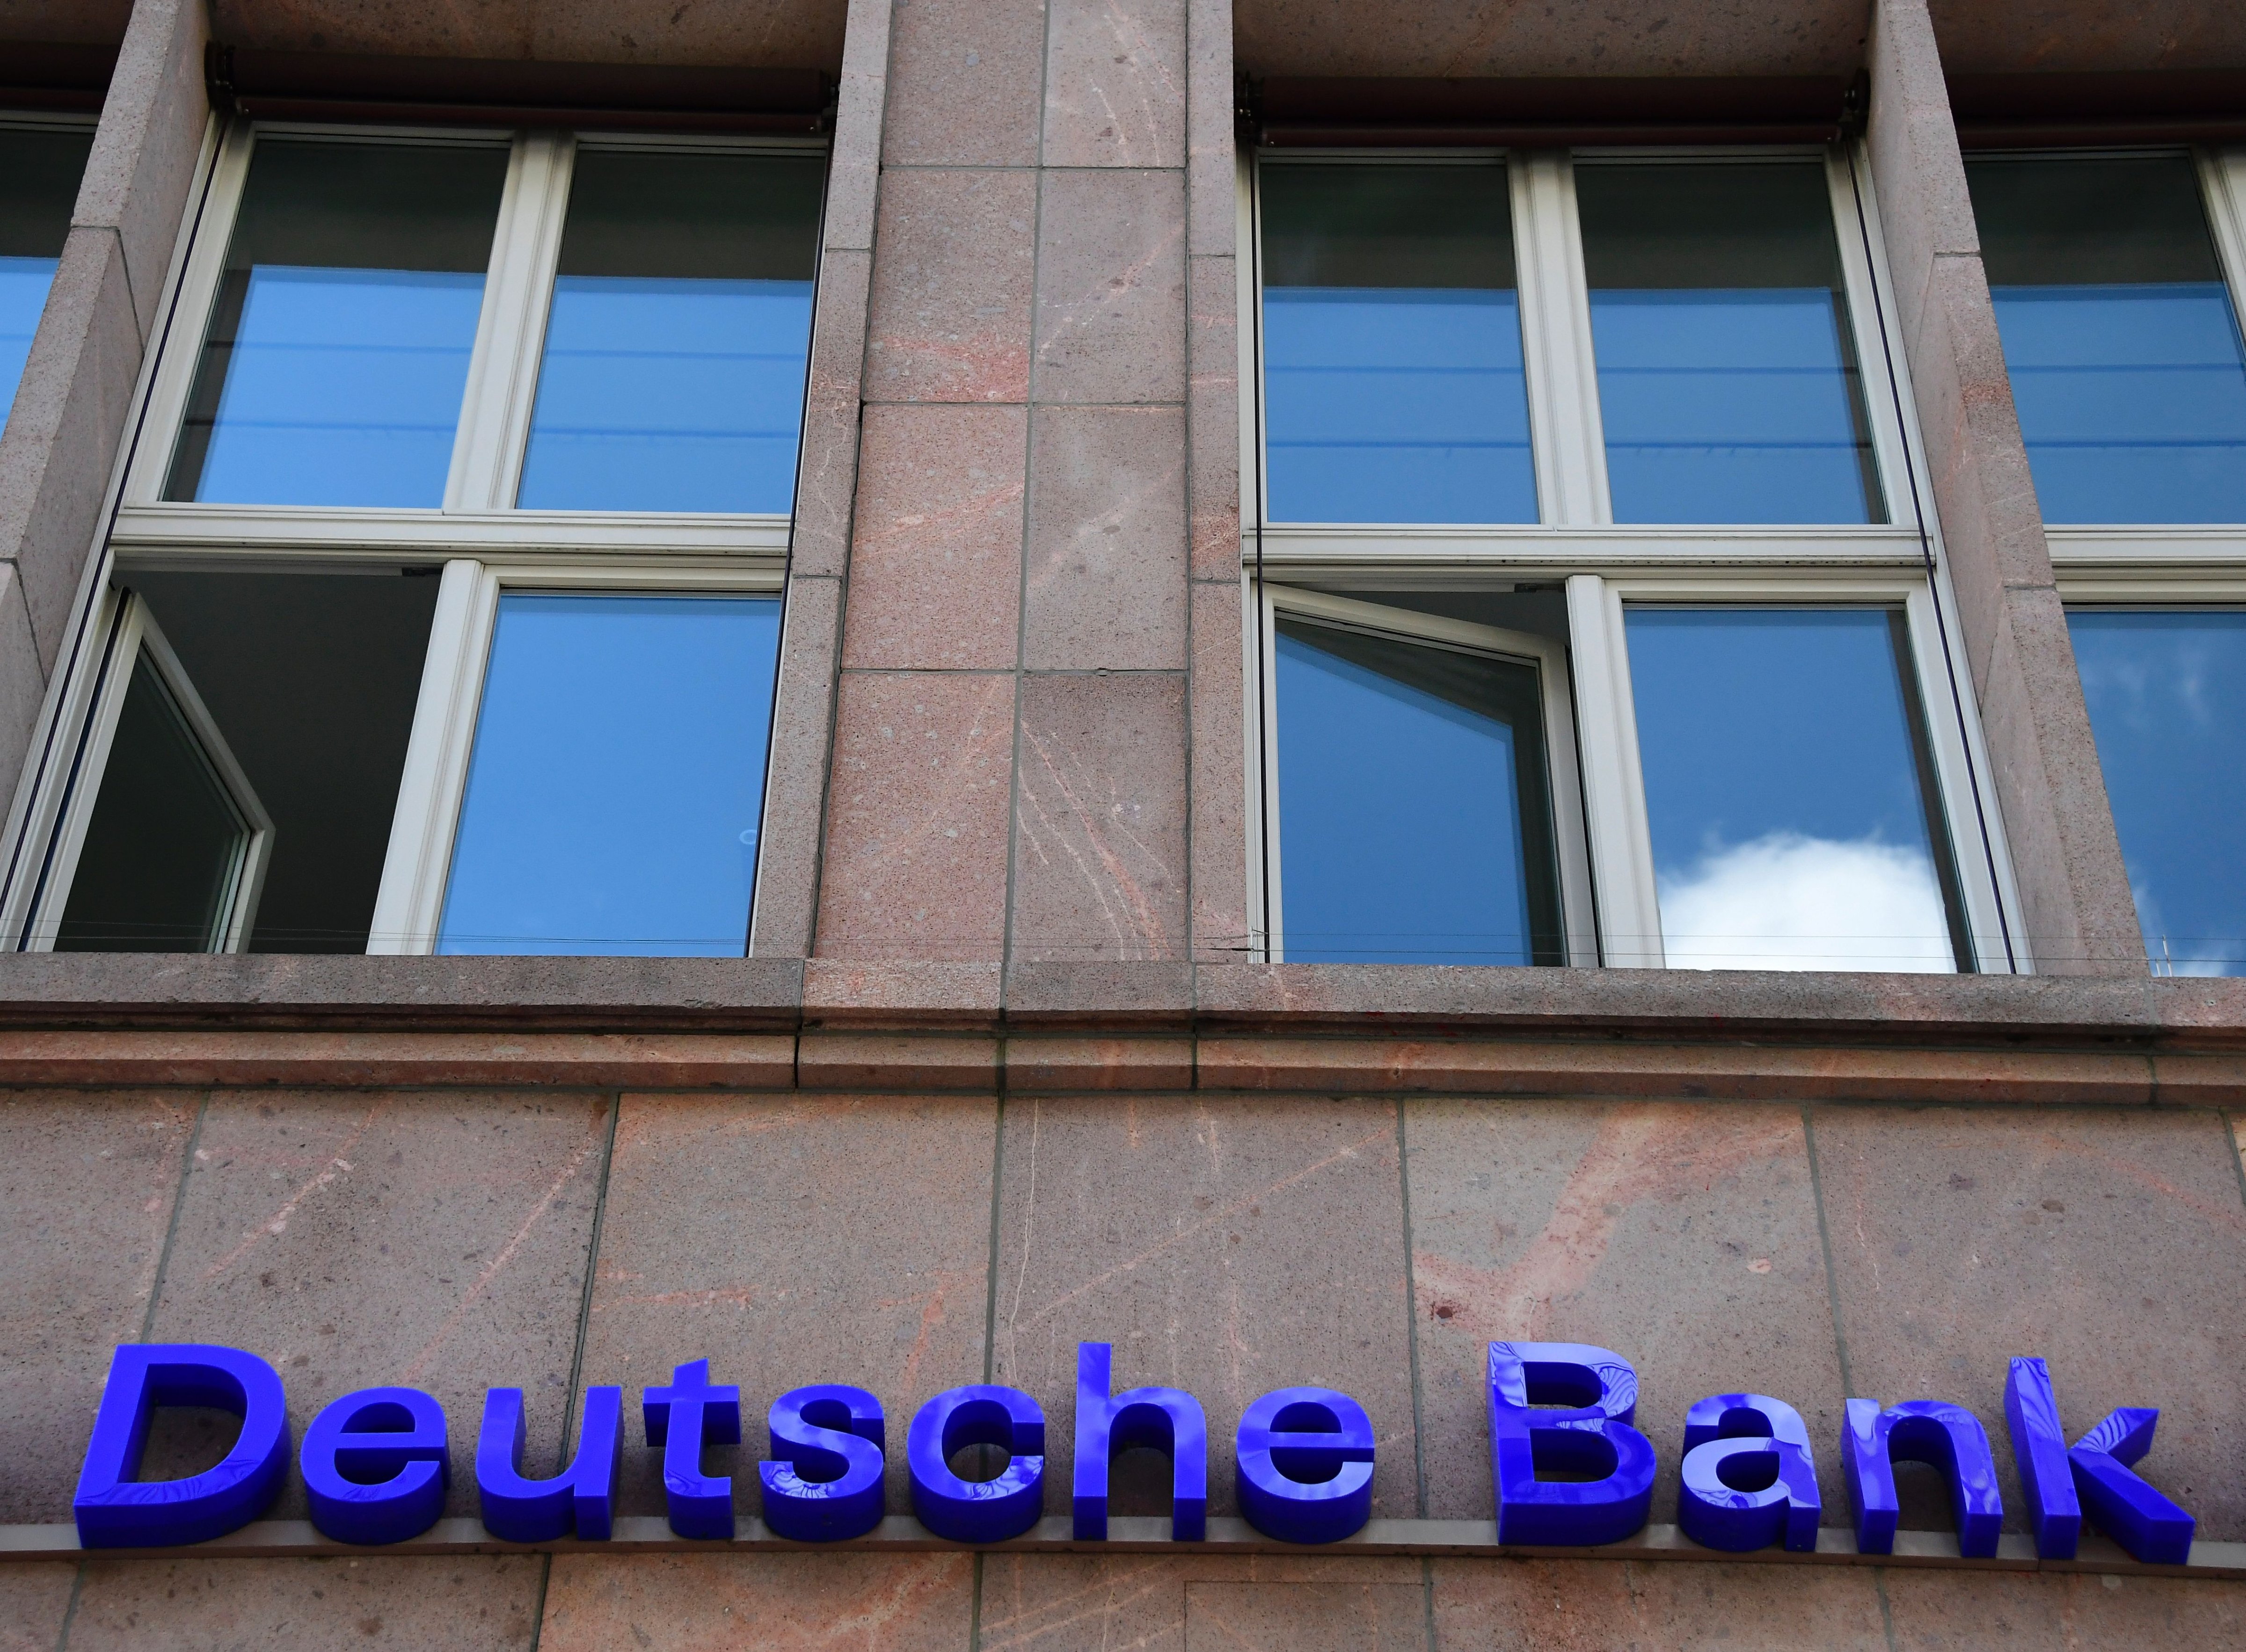 The logo of Germany's biggest lender Deutsche Bank is seen on a branch of the bank in Berlin's Mitte district on September 30, 2016.
                      Shares in Deutsche Bank plummeted on the Frankfurt stock market, dragging other European banks and global markets down with it, after reports some customers were pulling money out. (TOBIAS SCHWARZ—AFP/Getty Images)